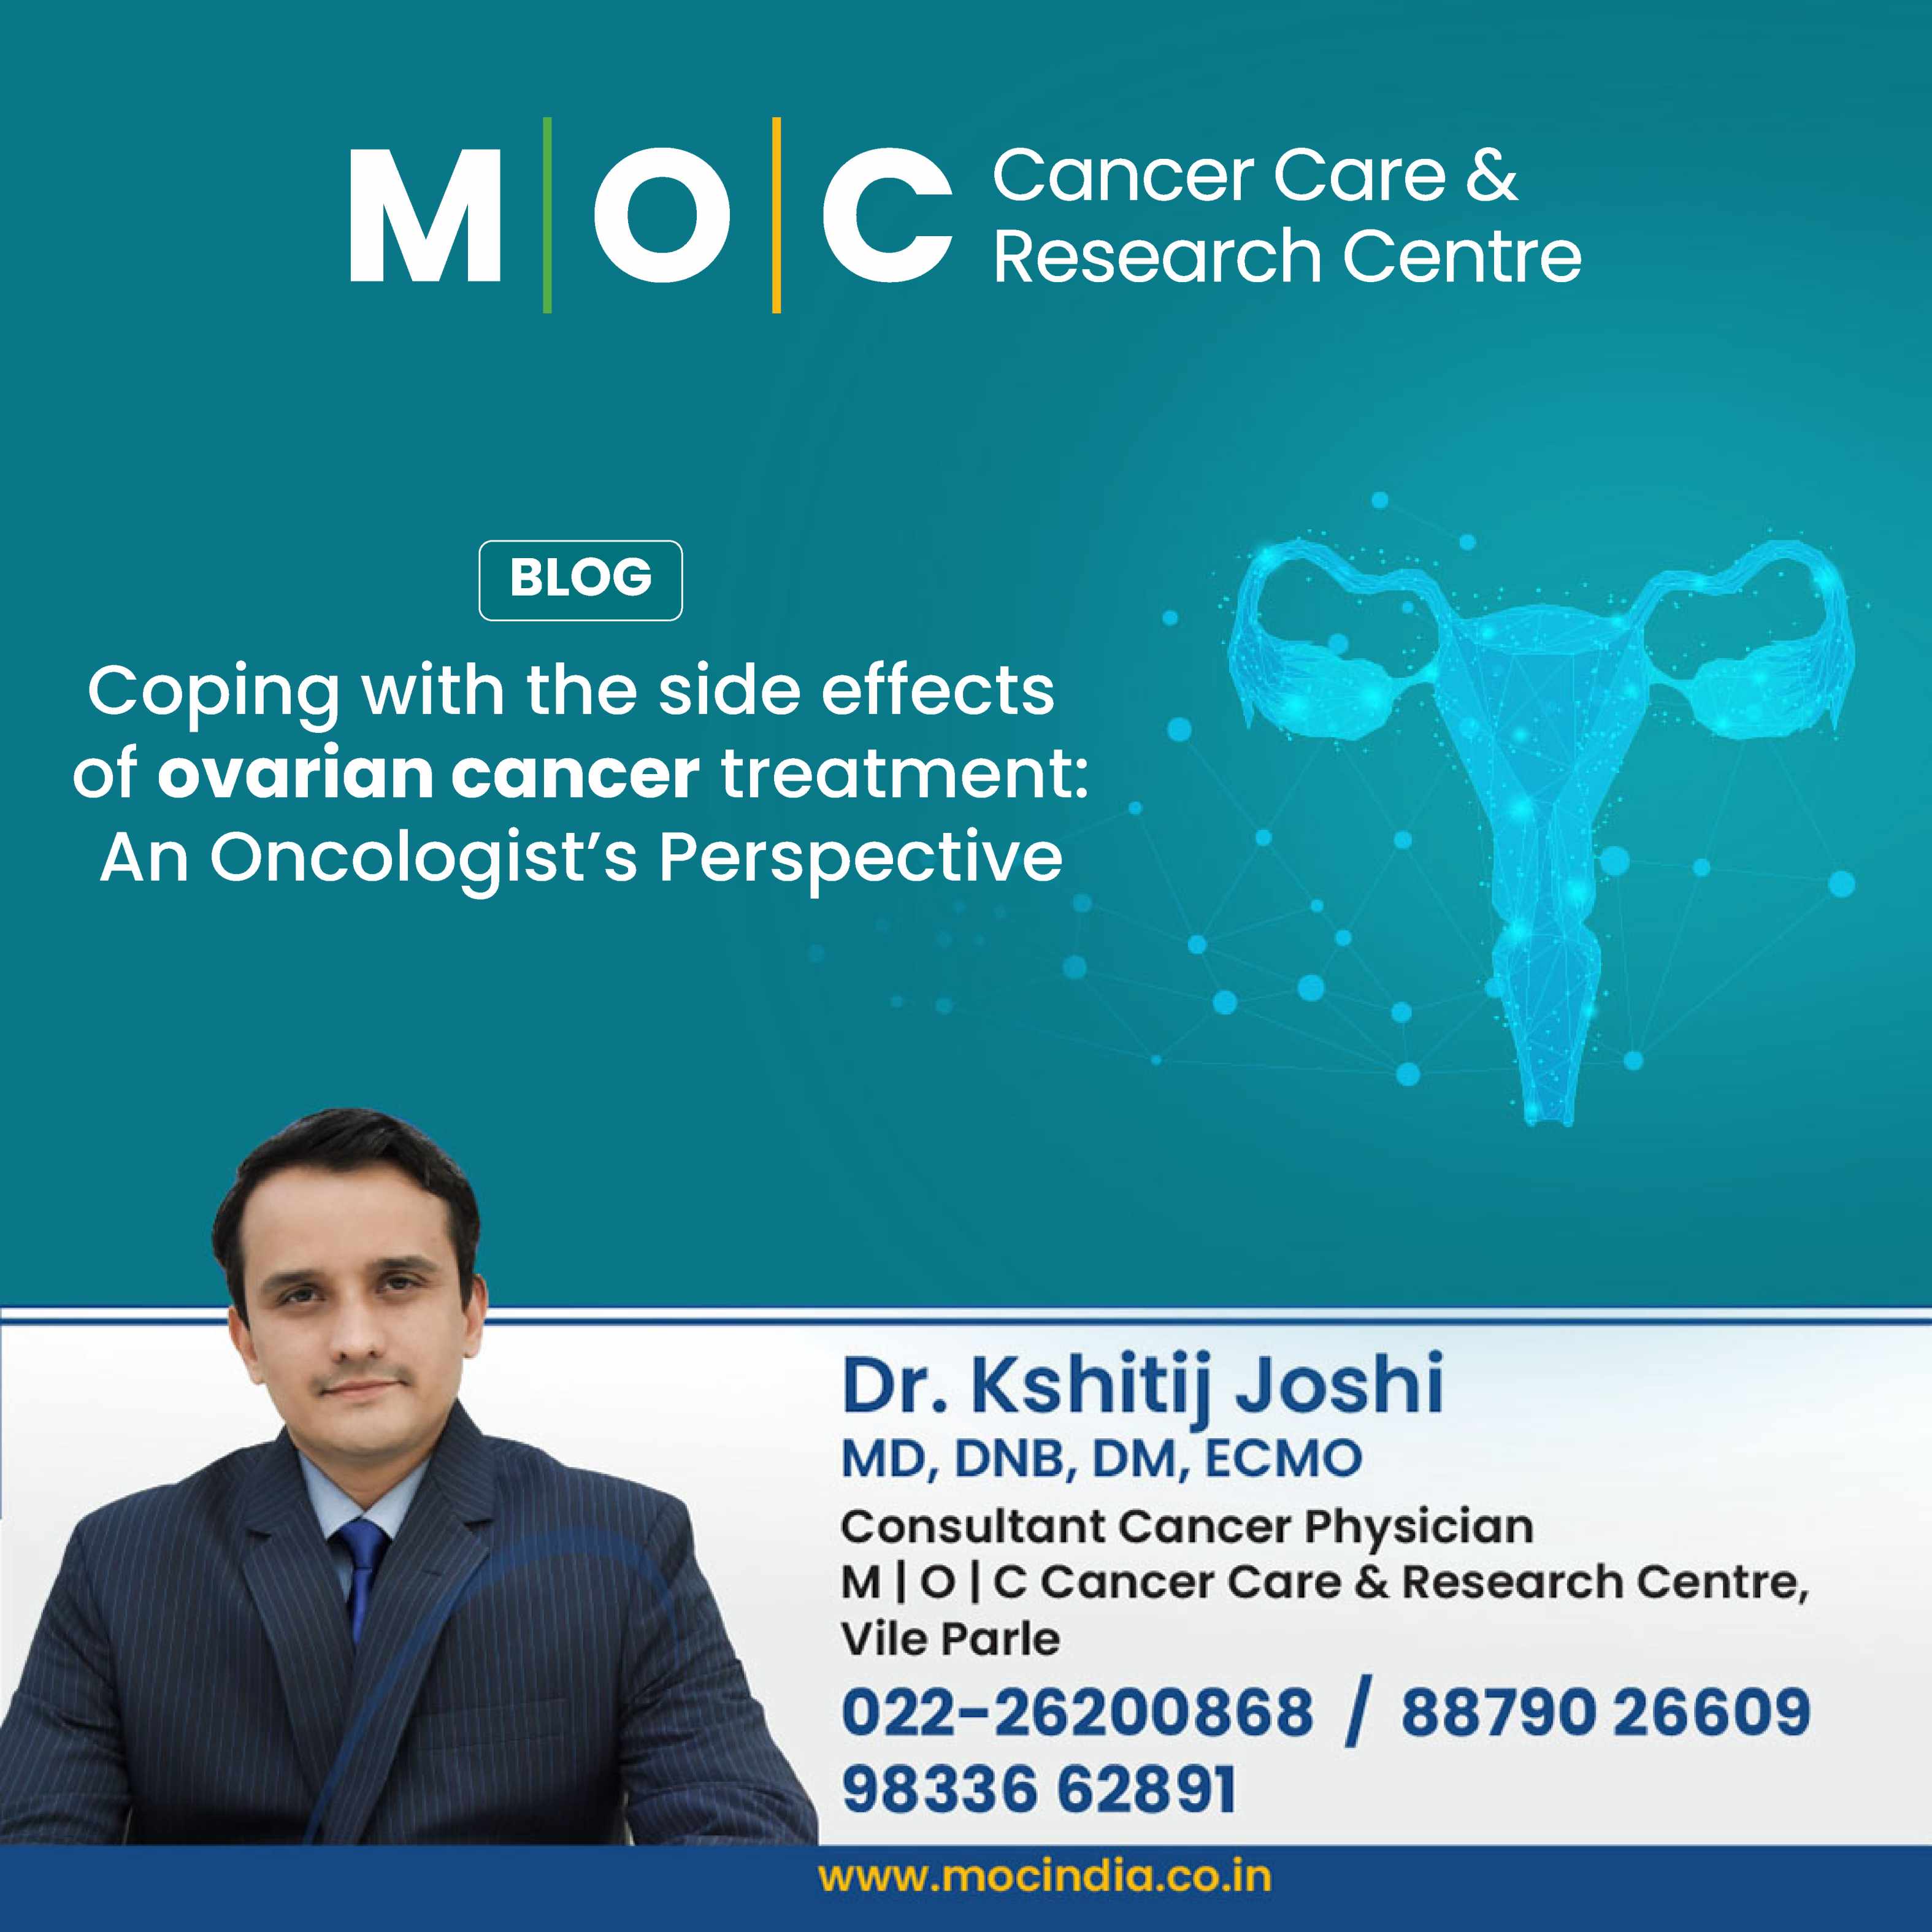 Coping with the side effects of ovarian cancer treatment: An Oncologist’s Perspective